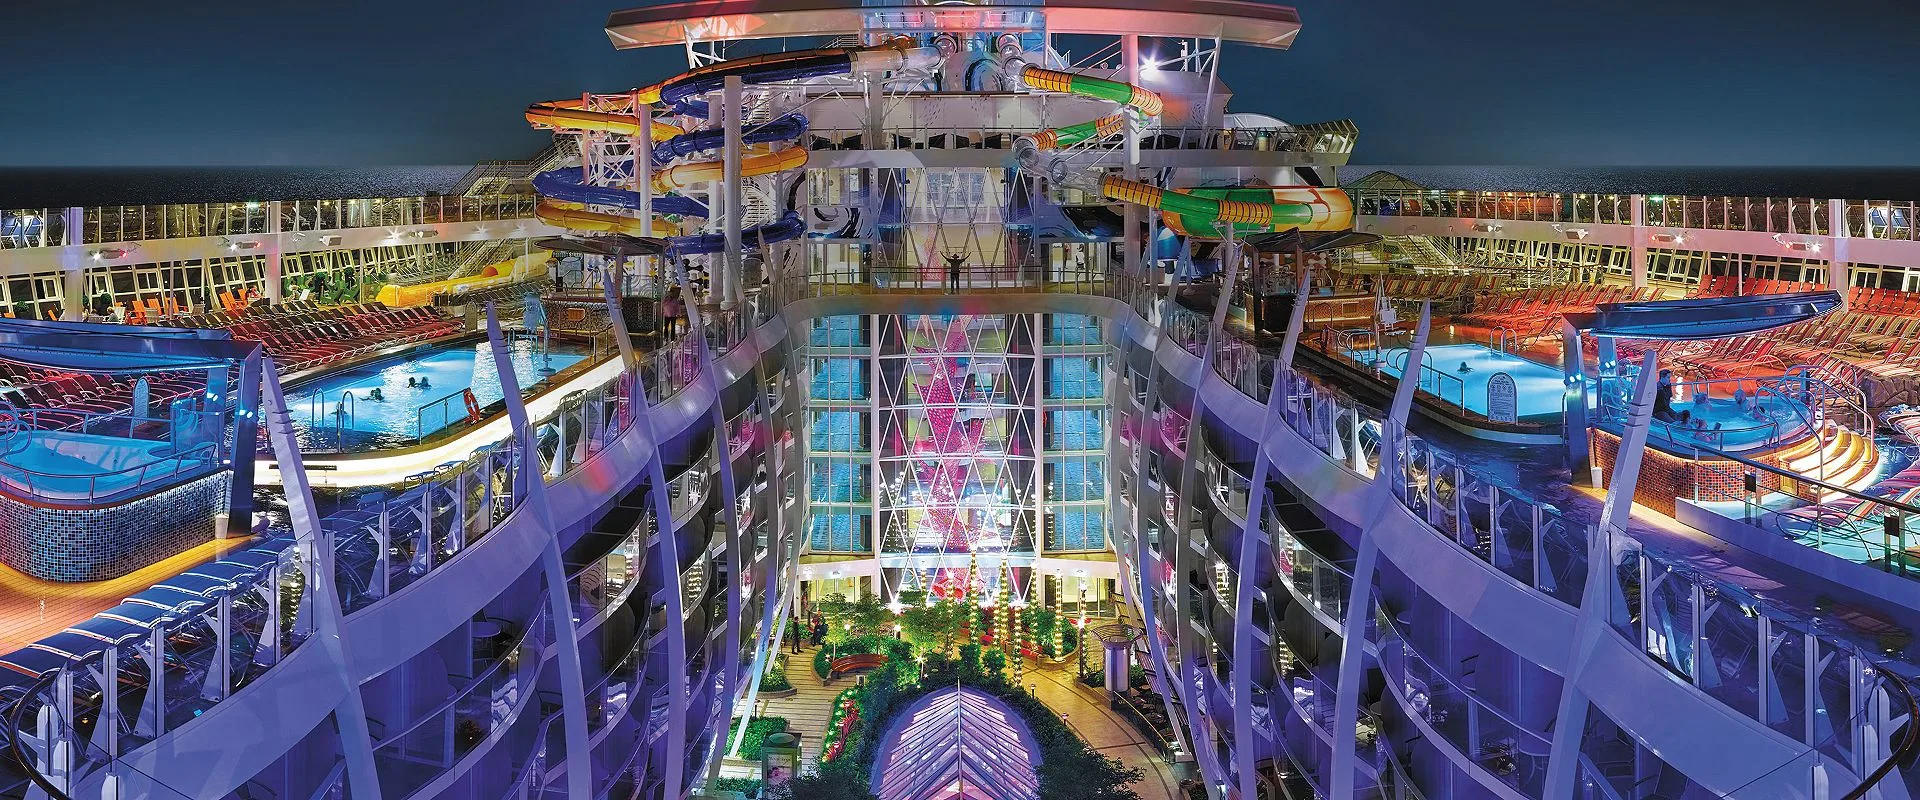 Image of Harmony of the Seas Central Park, sourced from: Royal Caribbean International https://touristwire.com/wp-content/uploads/2023/06/harmony-perfect-storm-central-park-pool-deck-nightime-overview-hero-asset.jpg